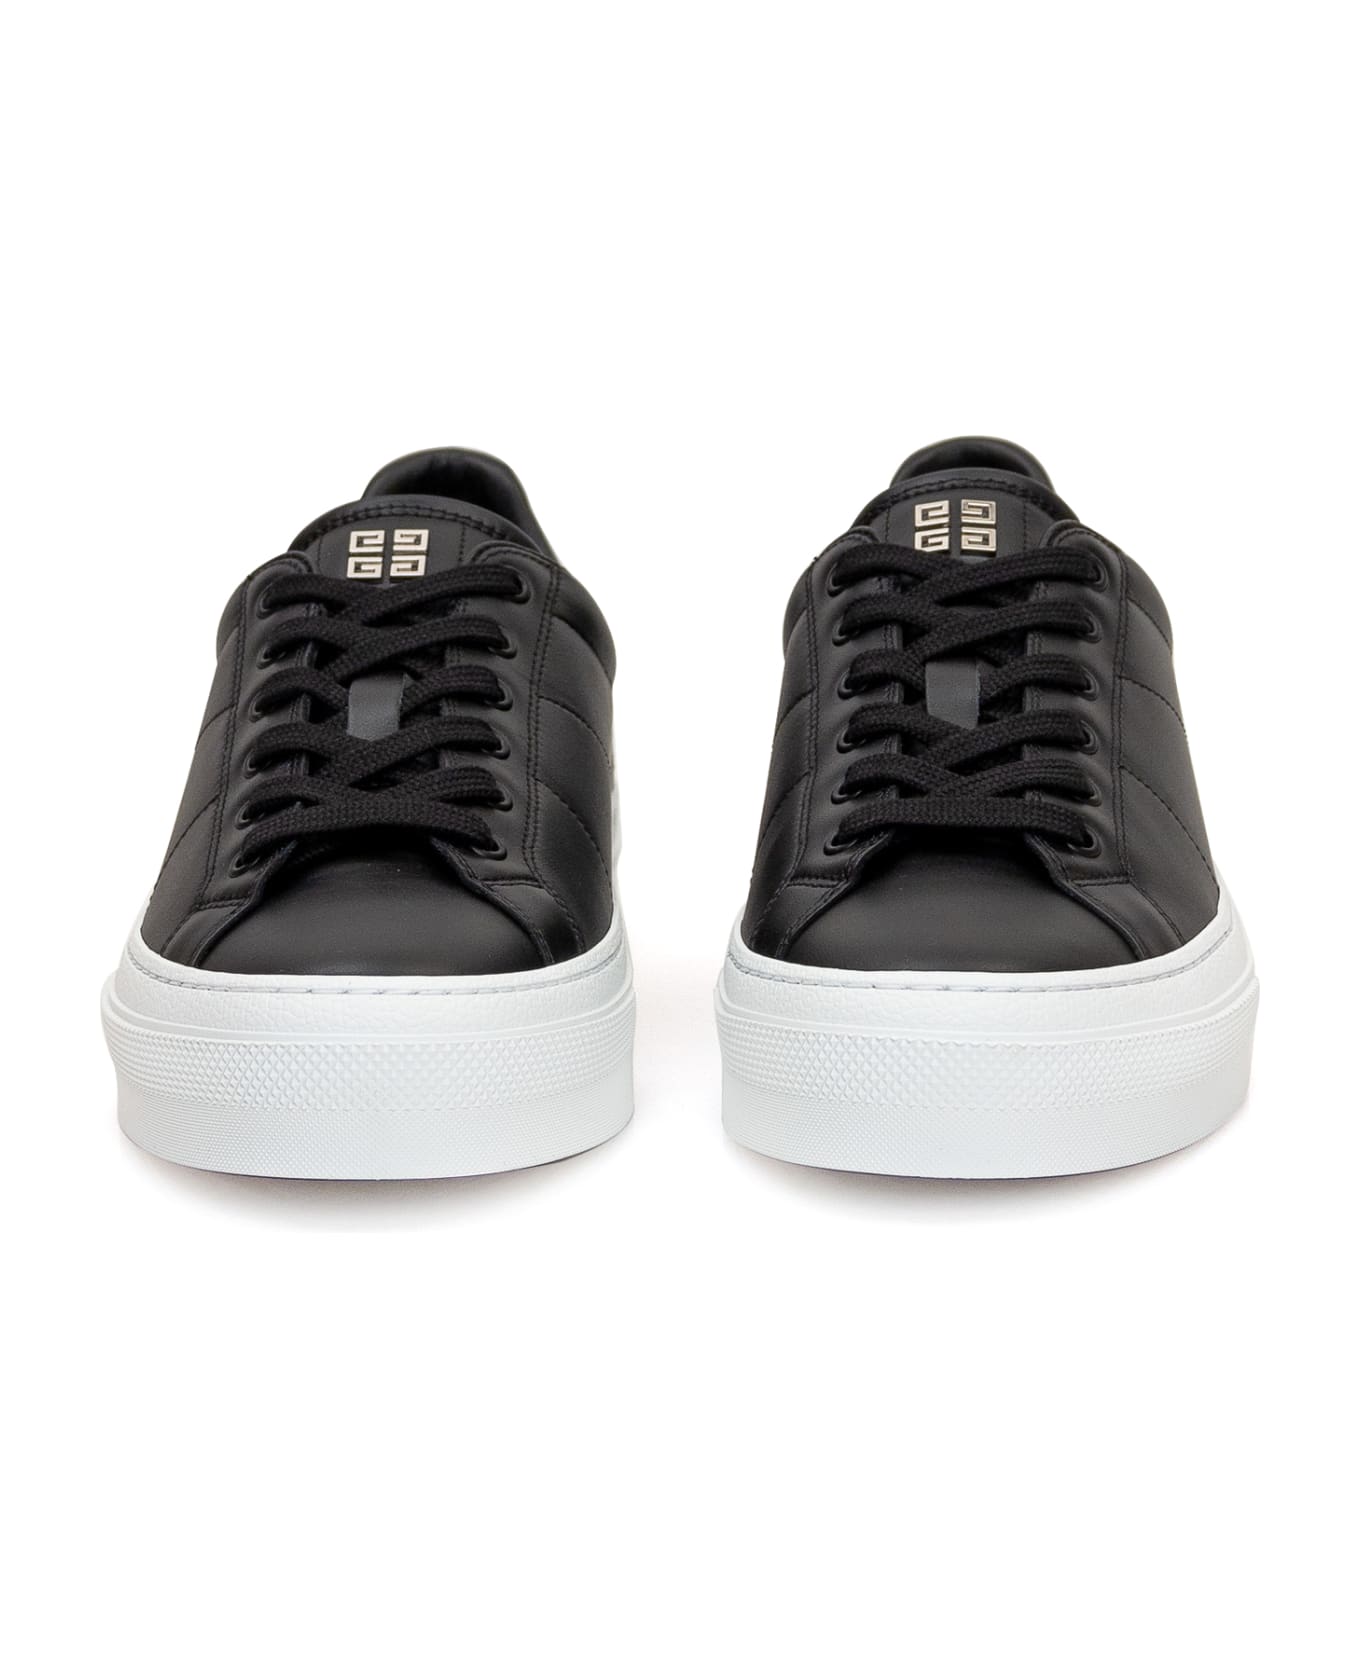 Givenchy Black City Sport Sneakers With Printed Logo - Black/white スニーカー